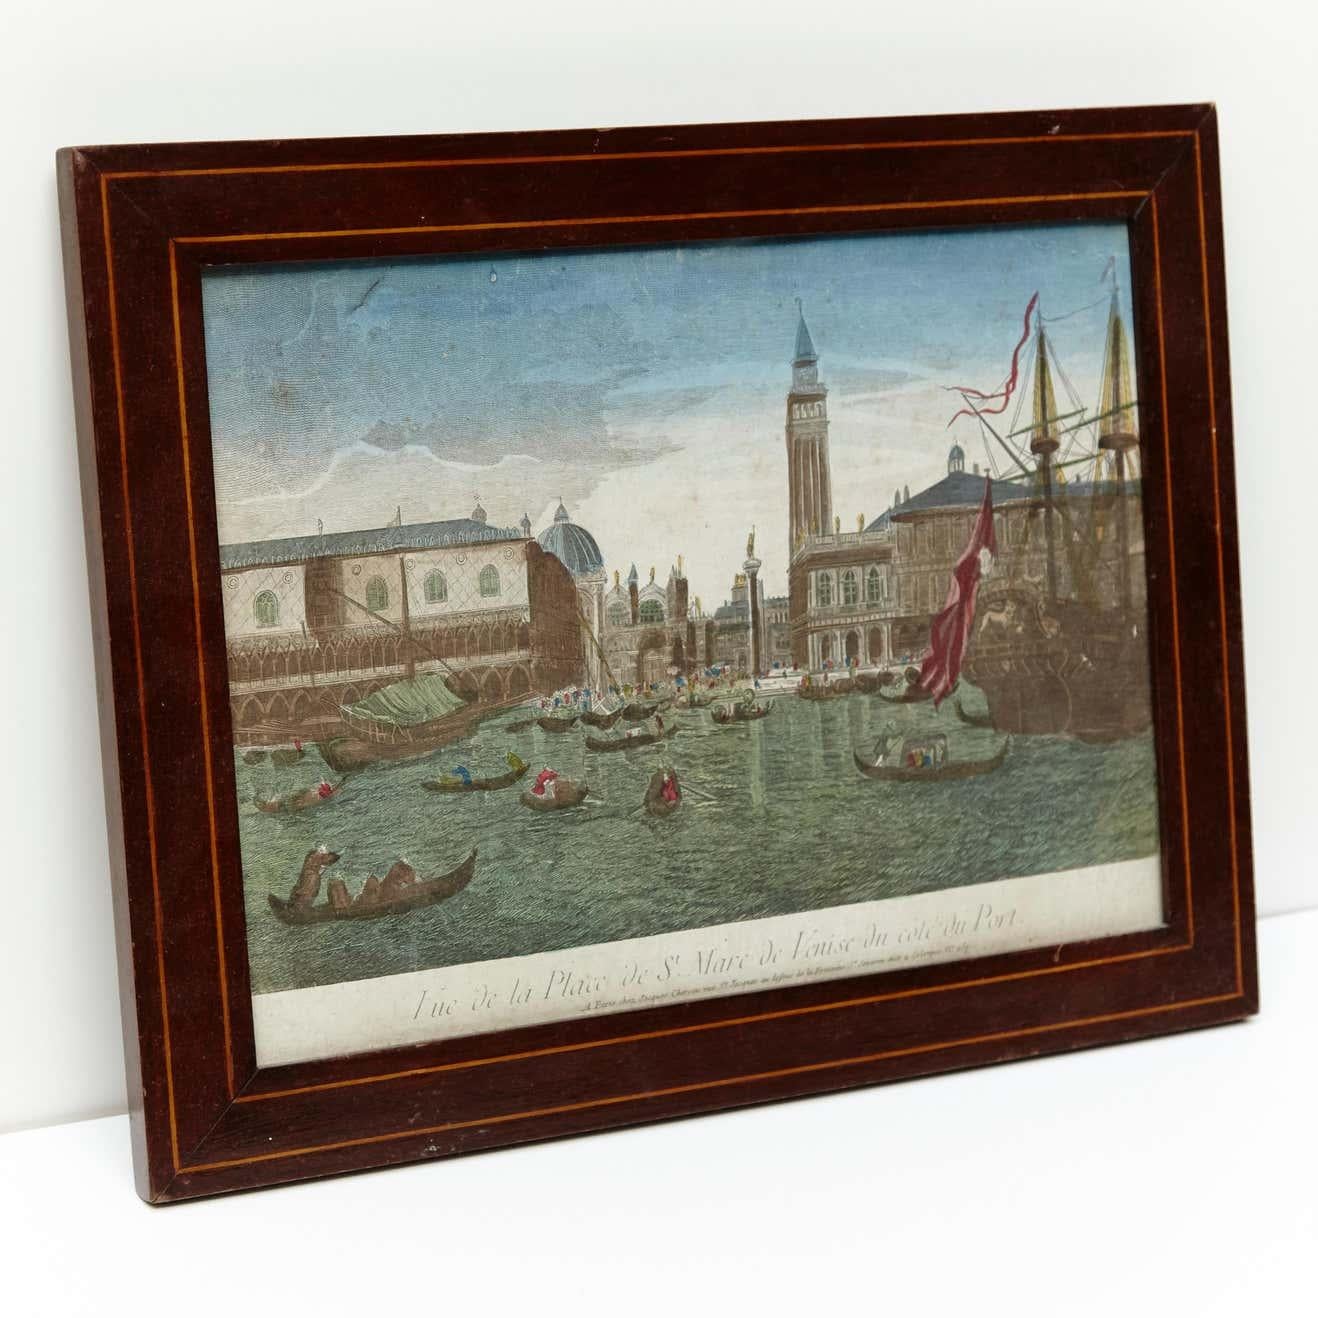 Color lithography of Venice, 18th century
Printed by Jacques Chereu.

The frame doesn’t has a glass.
 